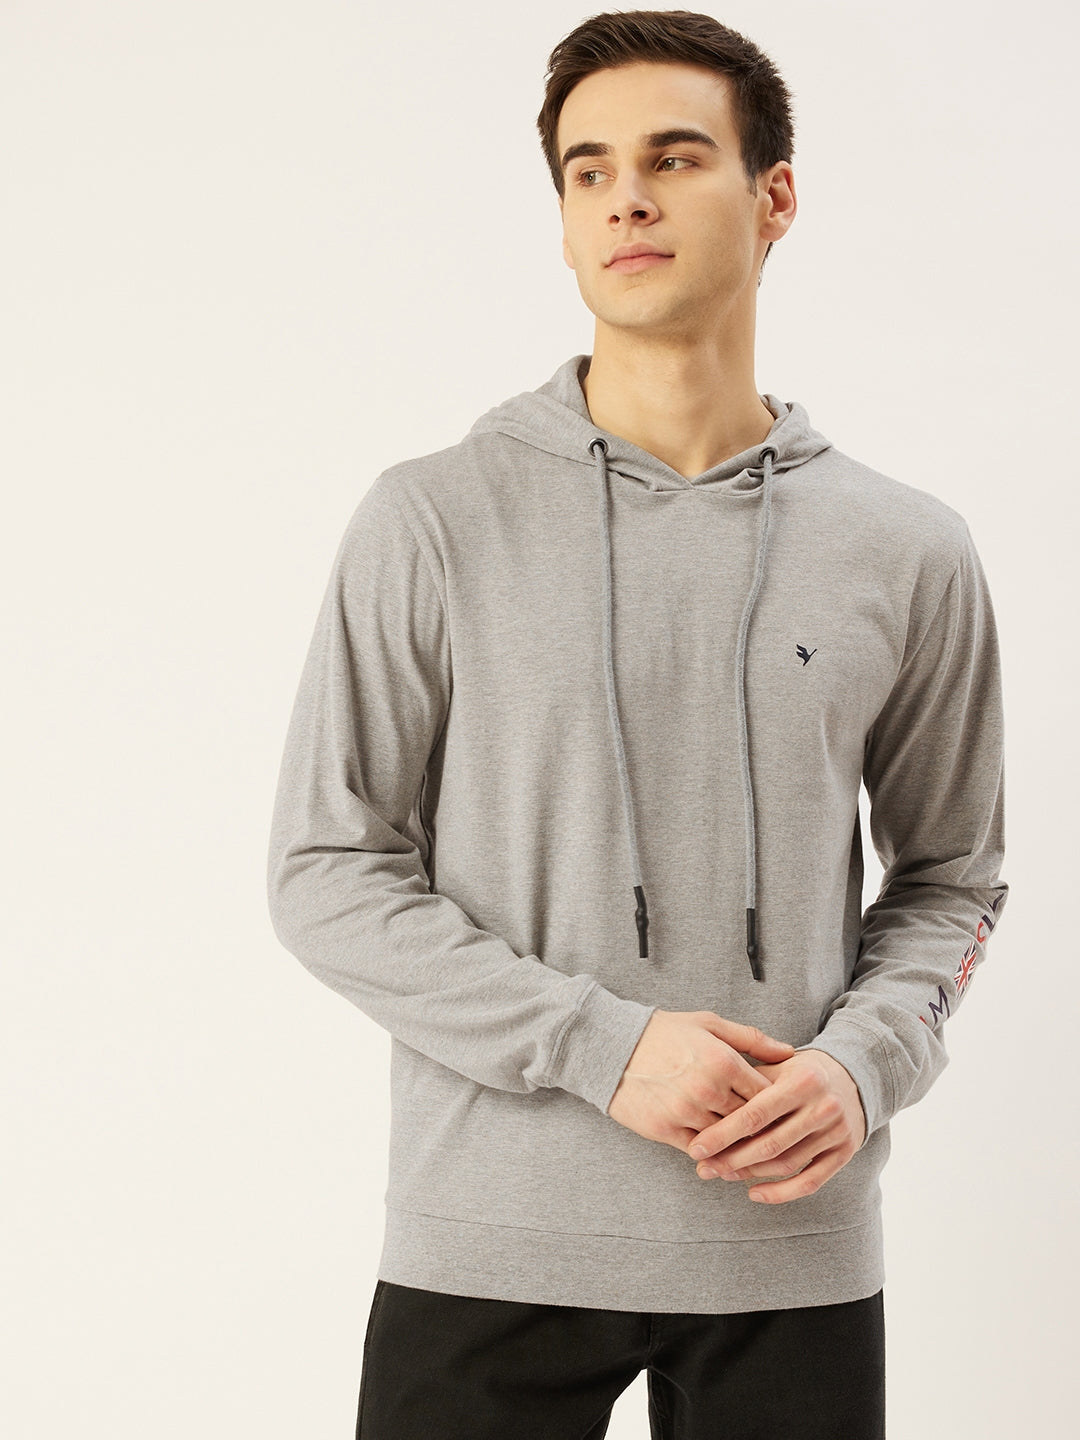 Men's Hooded Sweatshirt with Premium Cotton and Printed Full Sleeves